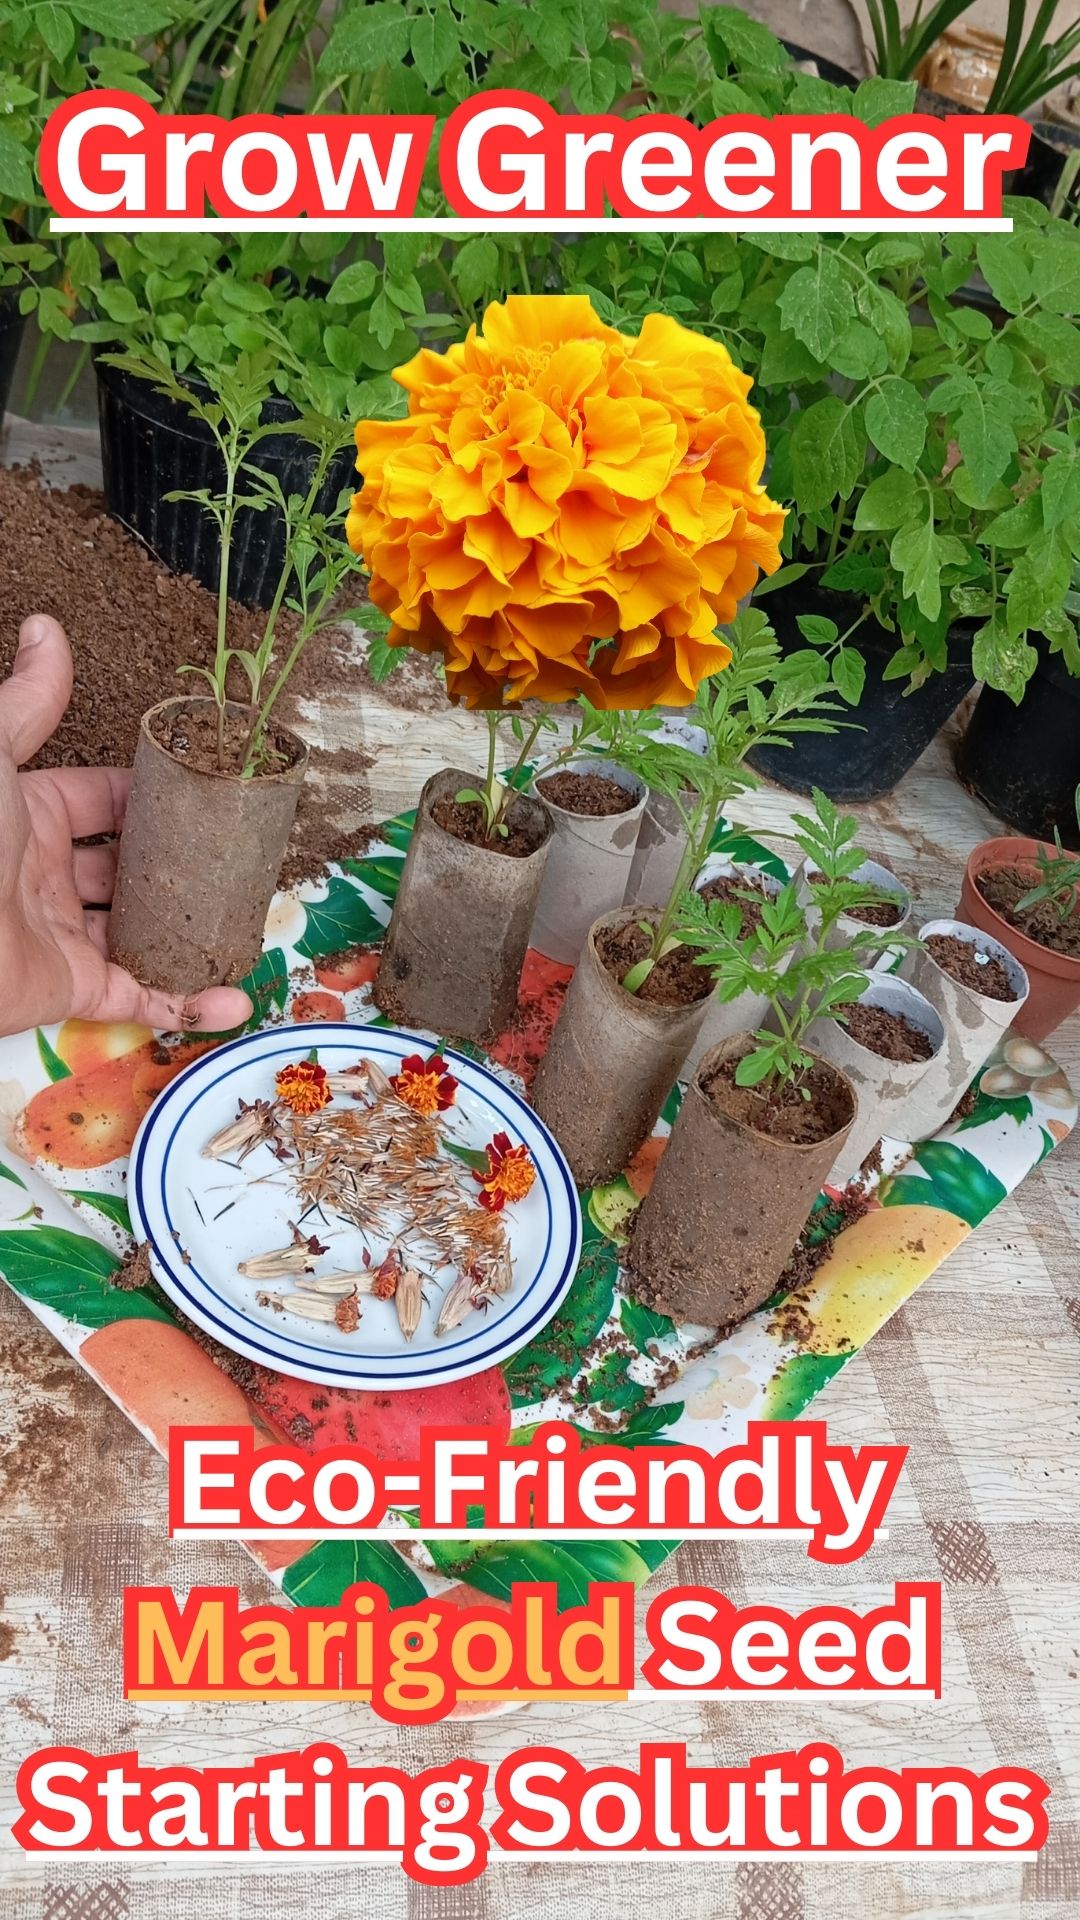 We're thrilled to share with you a creative and environmentally friendly way to start marigold seeds indoors using a simple household item: toilet paper rolls.